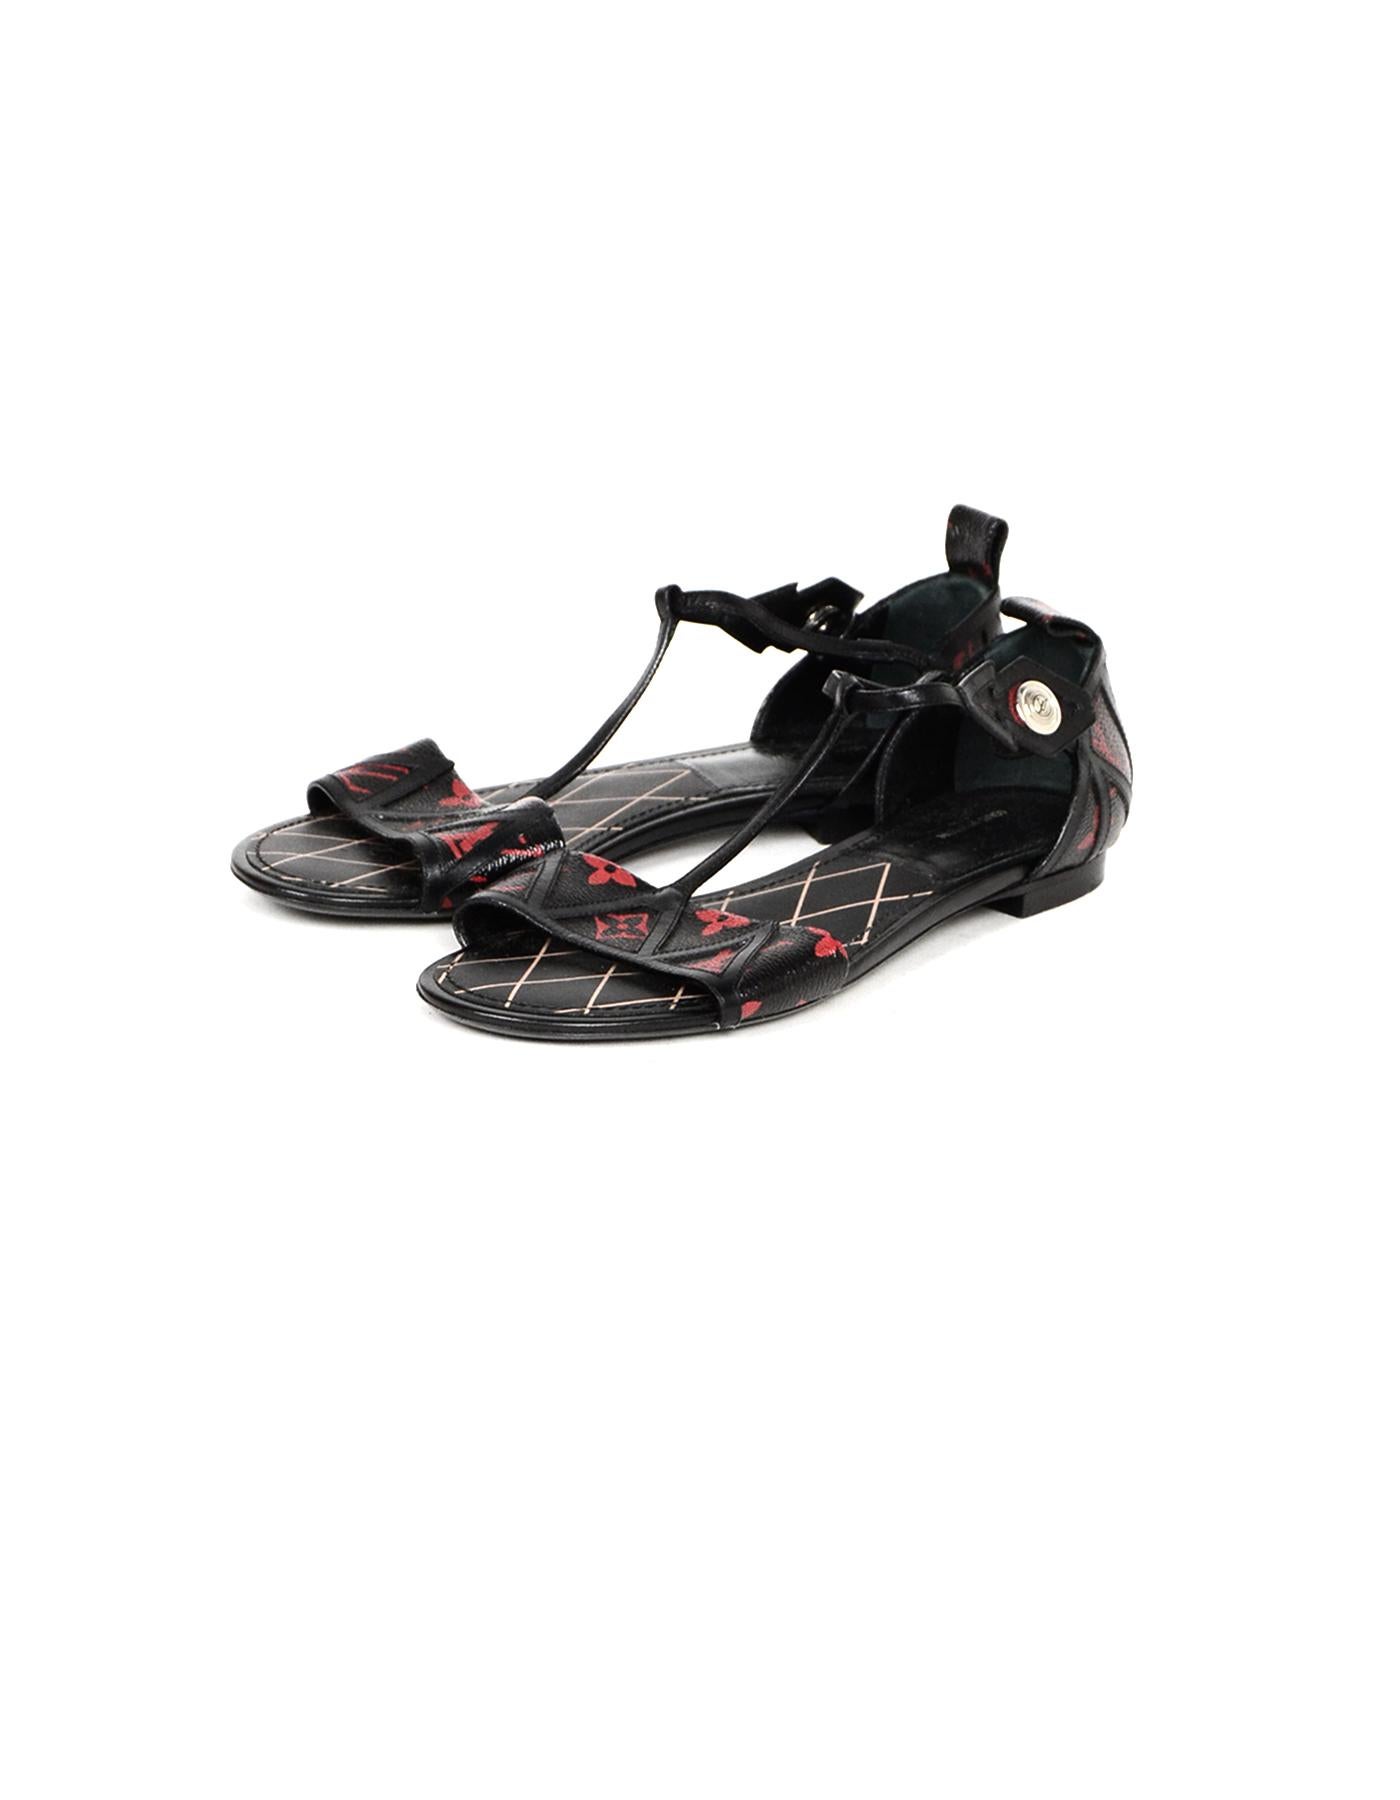 Louis Vuitton Black Red Canvas Leather Infrarouge Monogram T-Strap Sandals sz 38.5

Made In: Italy
Color: Black, Red
Hardware: Silvertone
Materials: Canvas leather, monogram
Closure/Opening: Side snap closure
Overall Condition: Very good pre-owned